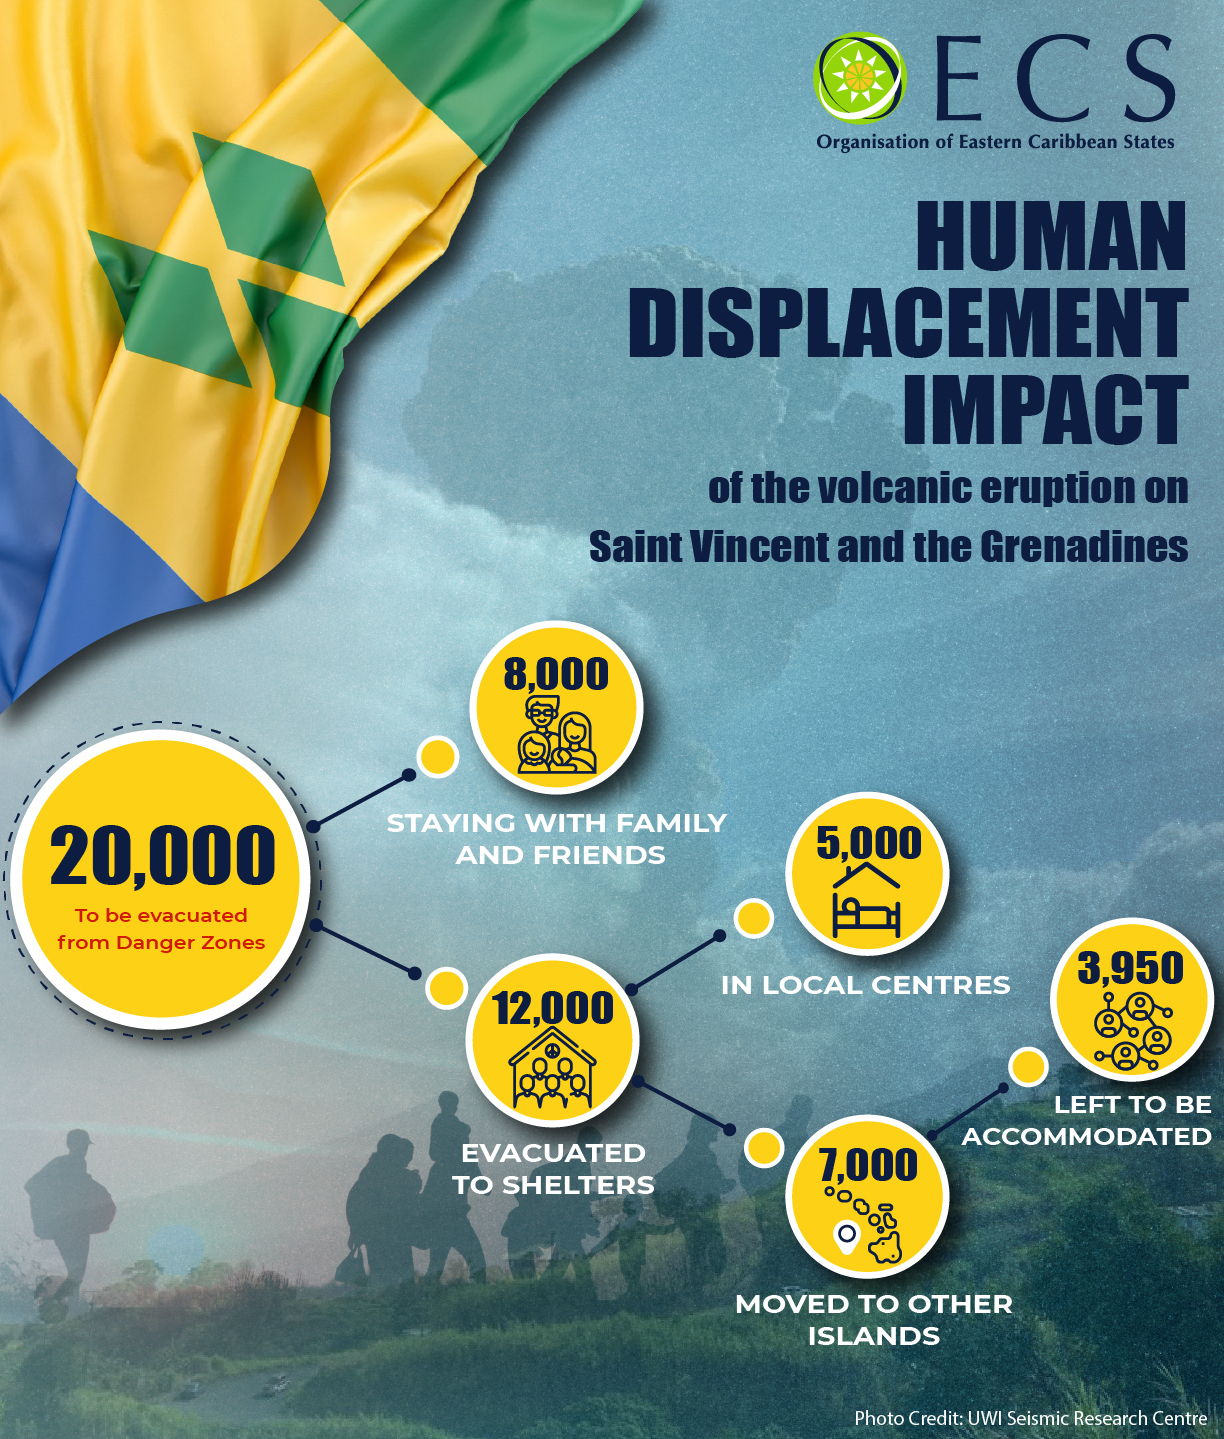 Caribbean News Global SVG-HumanImpact2 OECS Commission launches “Stronger Together Campaign” to support St Vincent and the Grenadines  